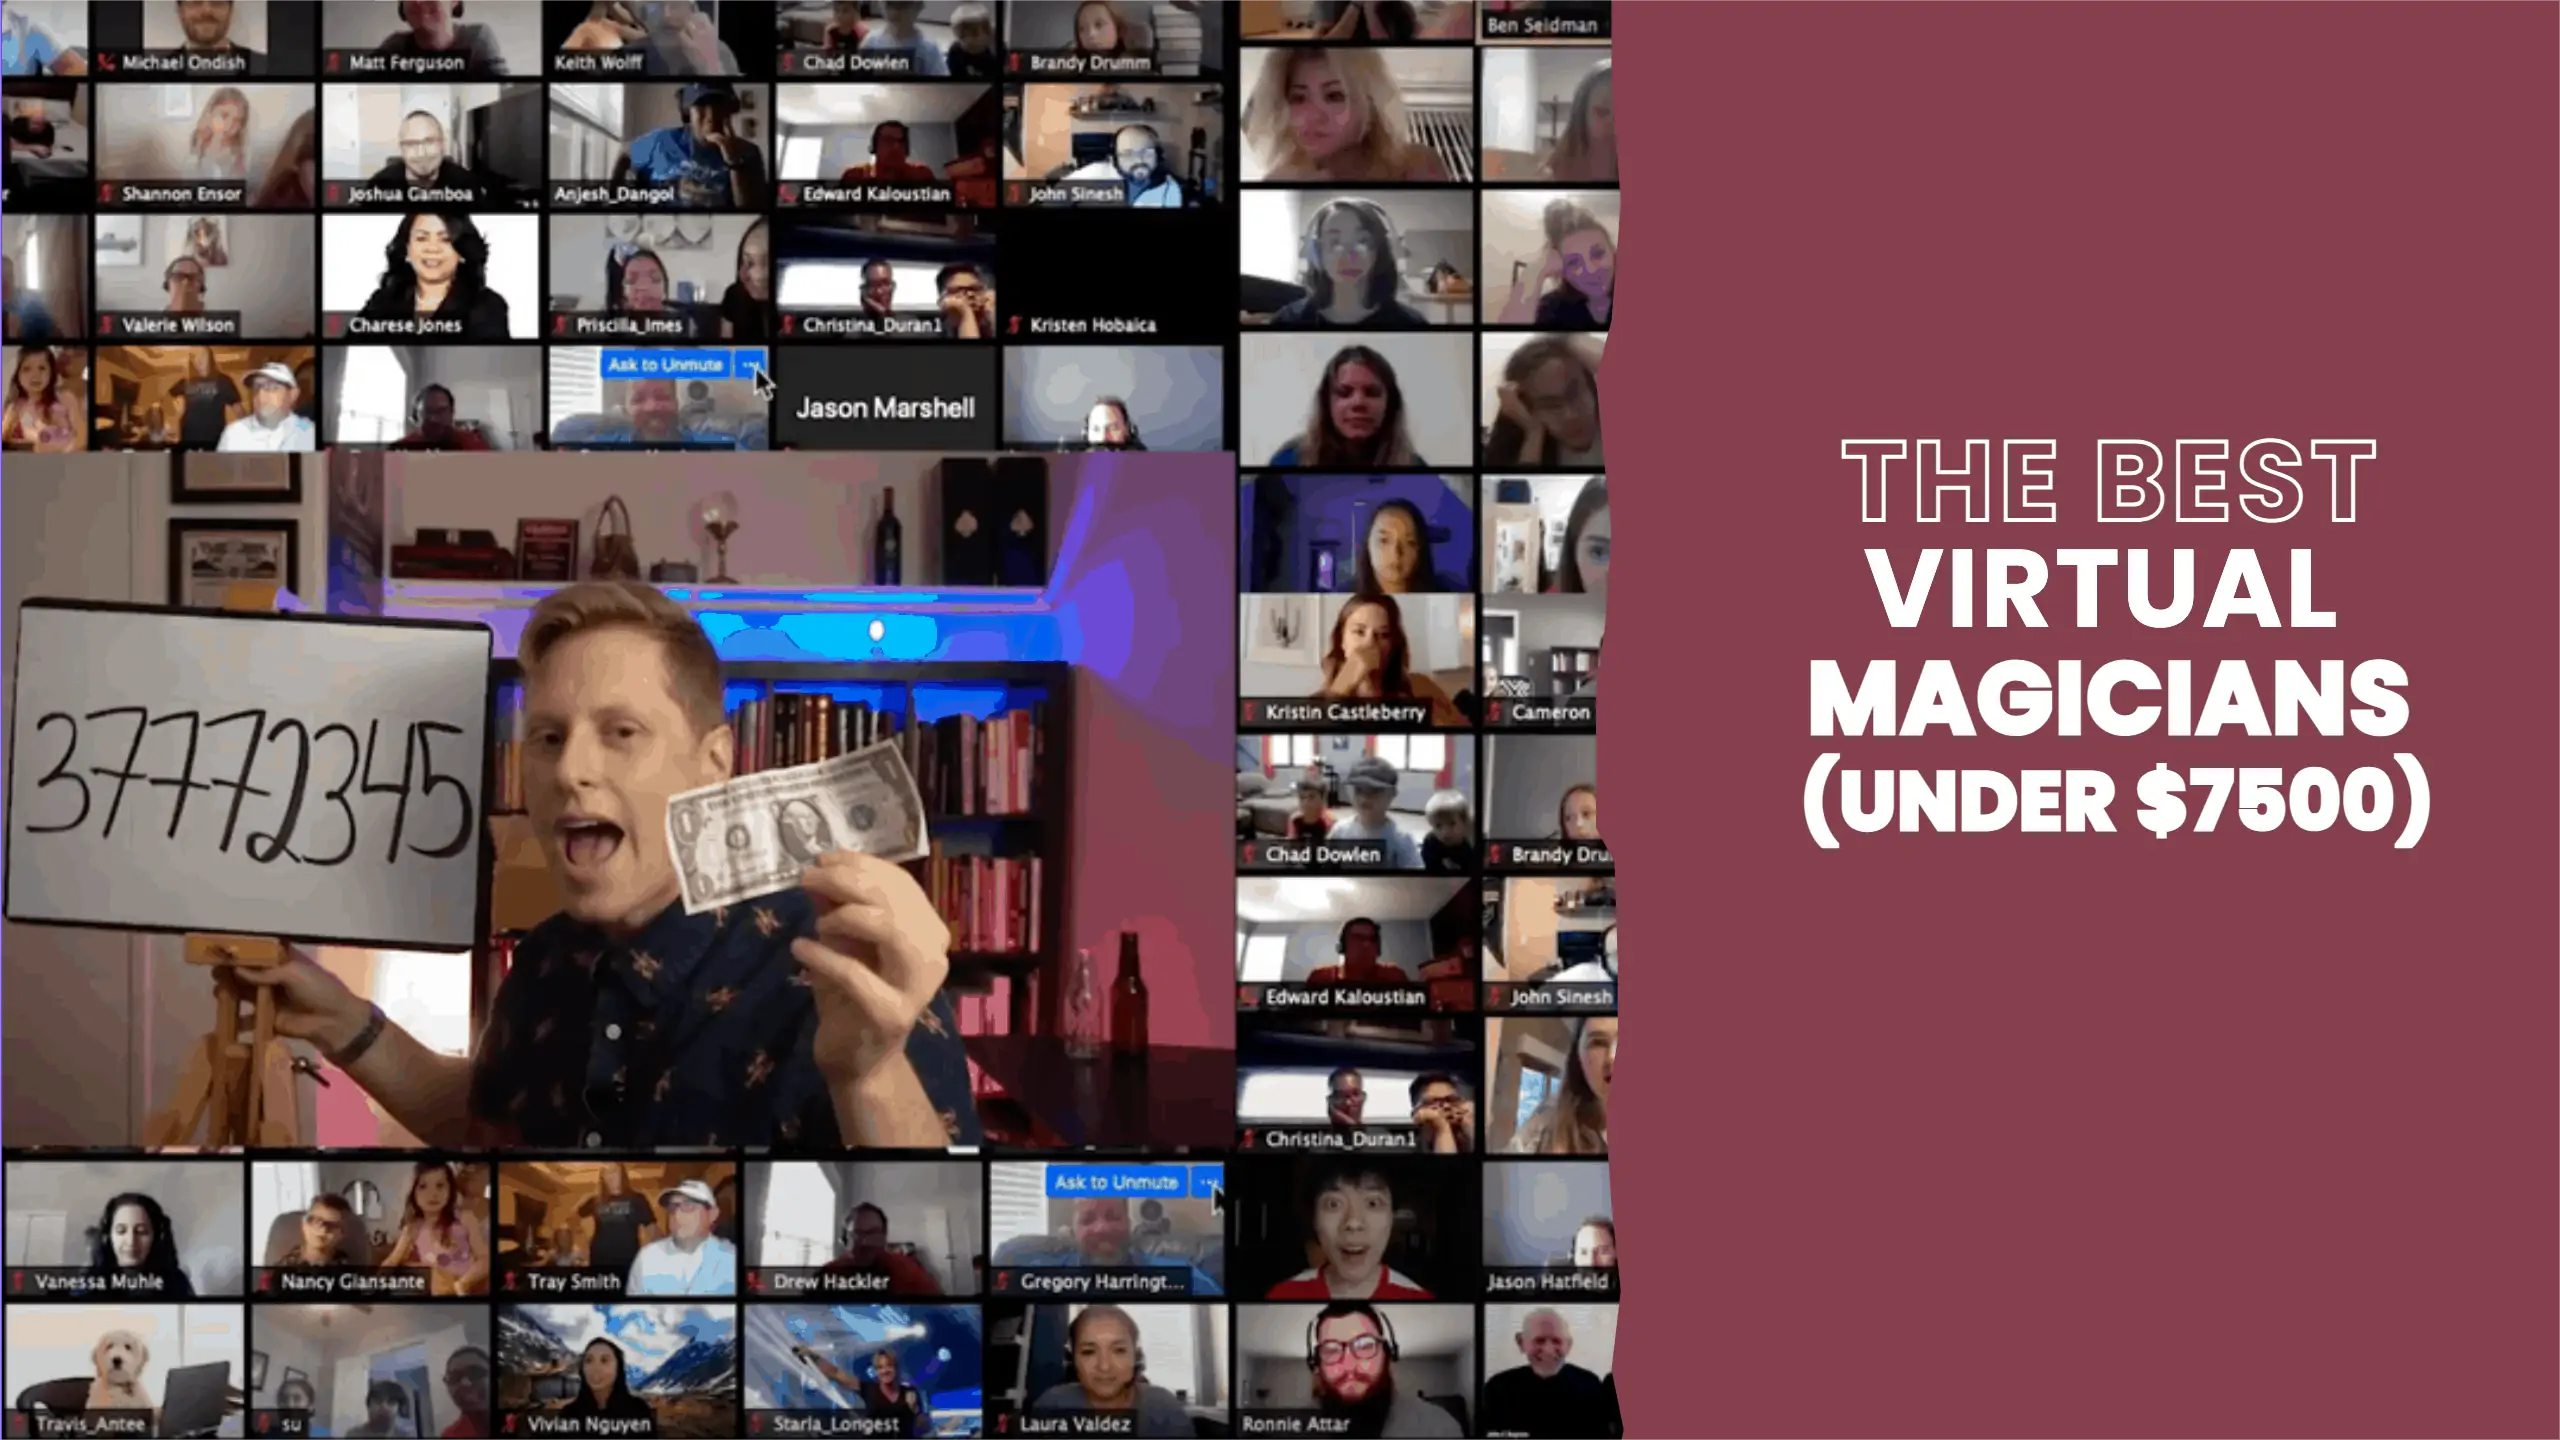 Book the Best Interactive Virtual Magic Show (under $7500)